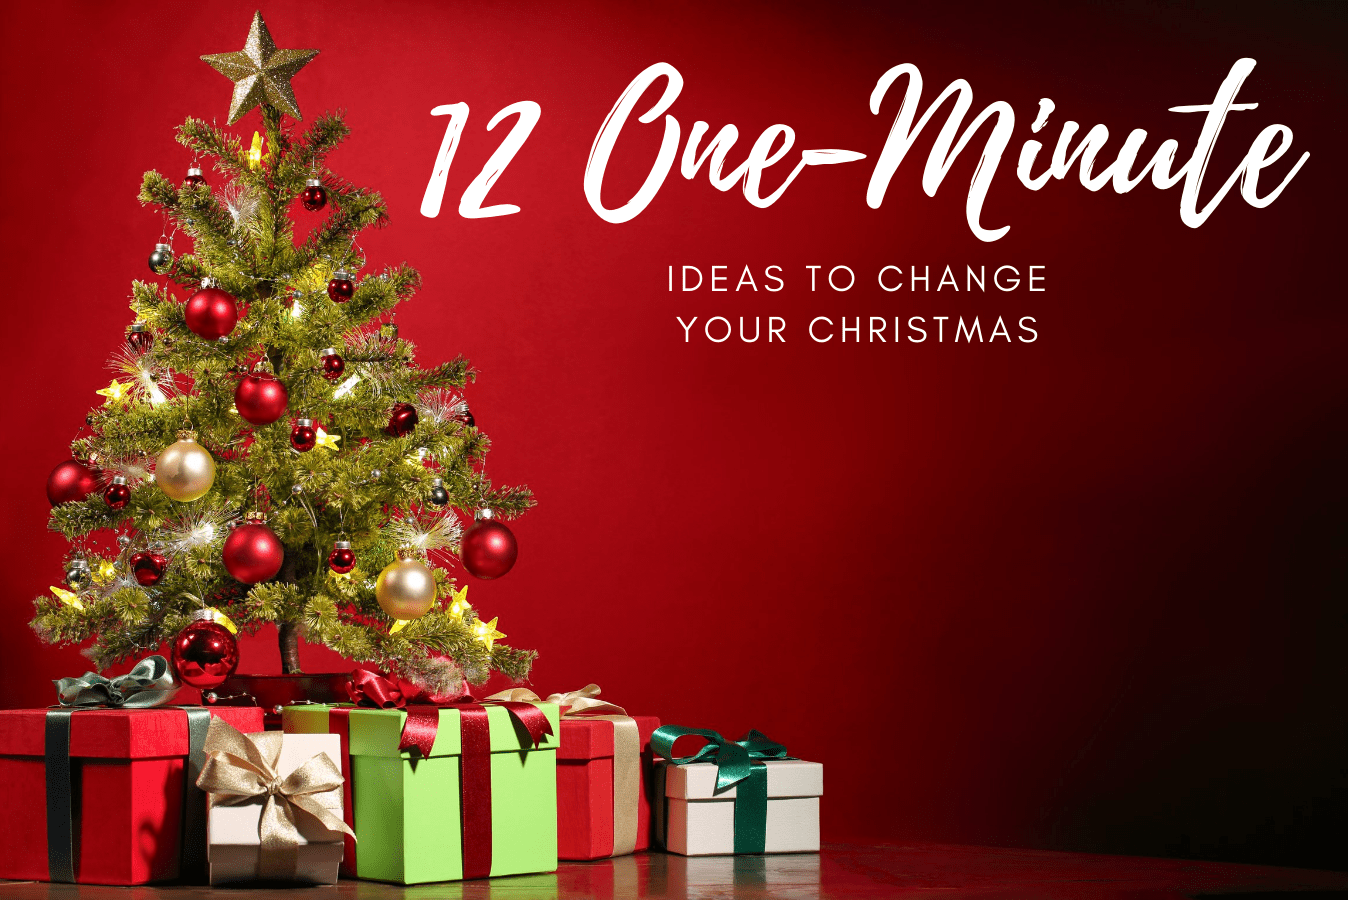 12 One-Minute Ideas to Change Your Christmas